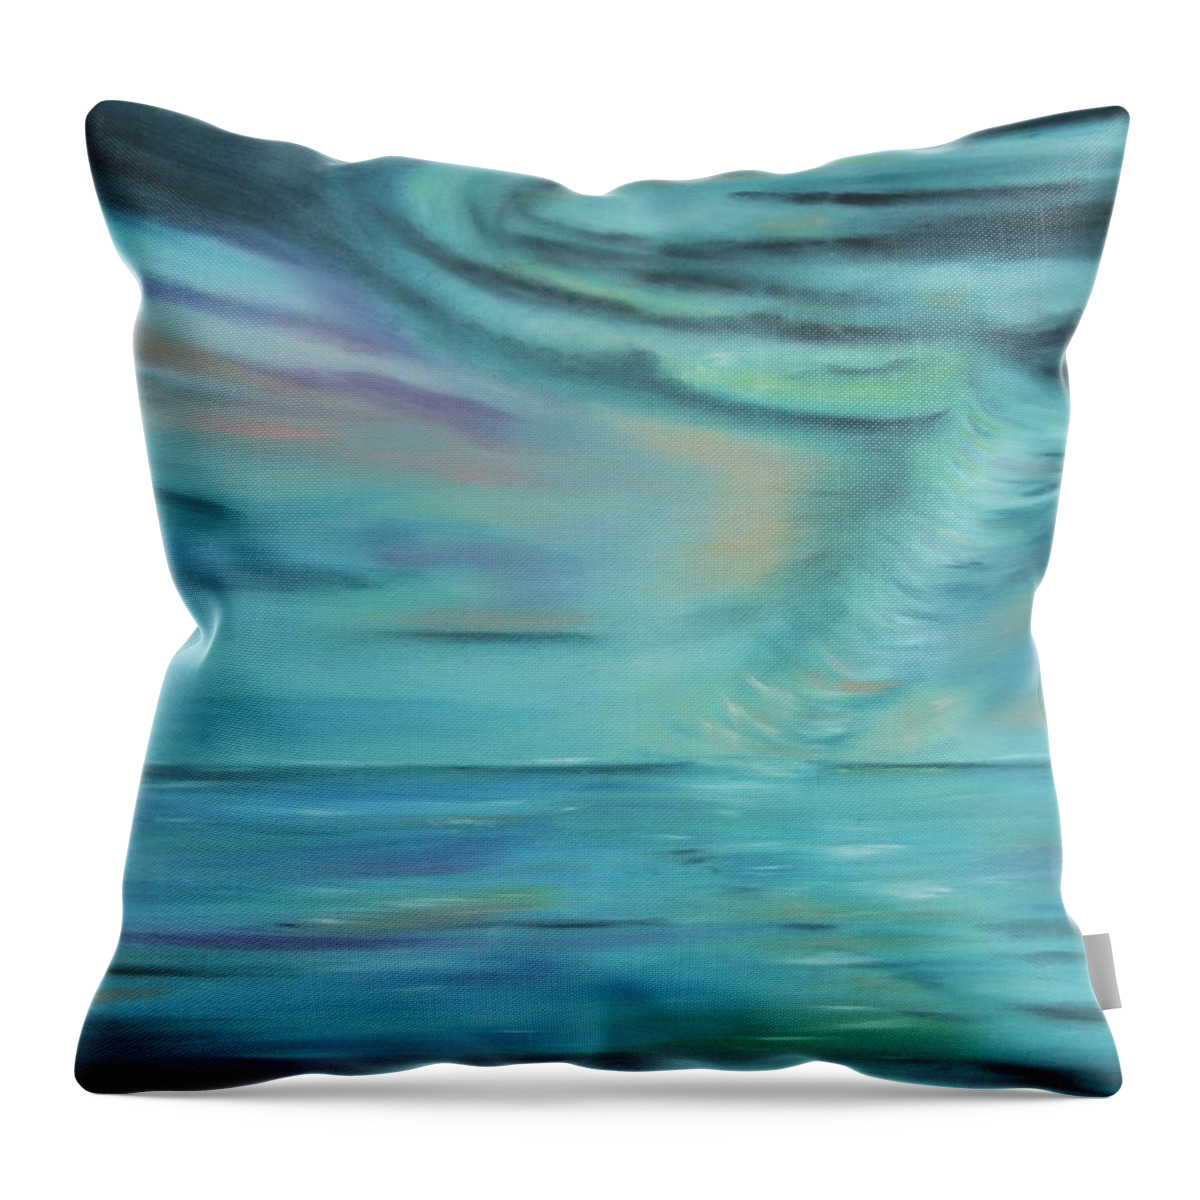 Blue Throw Pillow featuring the painting Mad Blue by Neslihan Ergul Colley